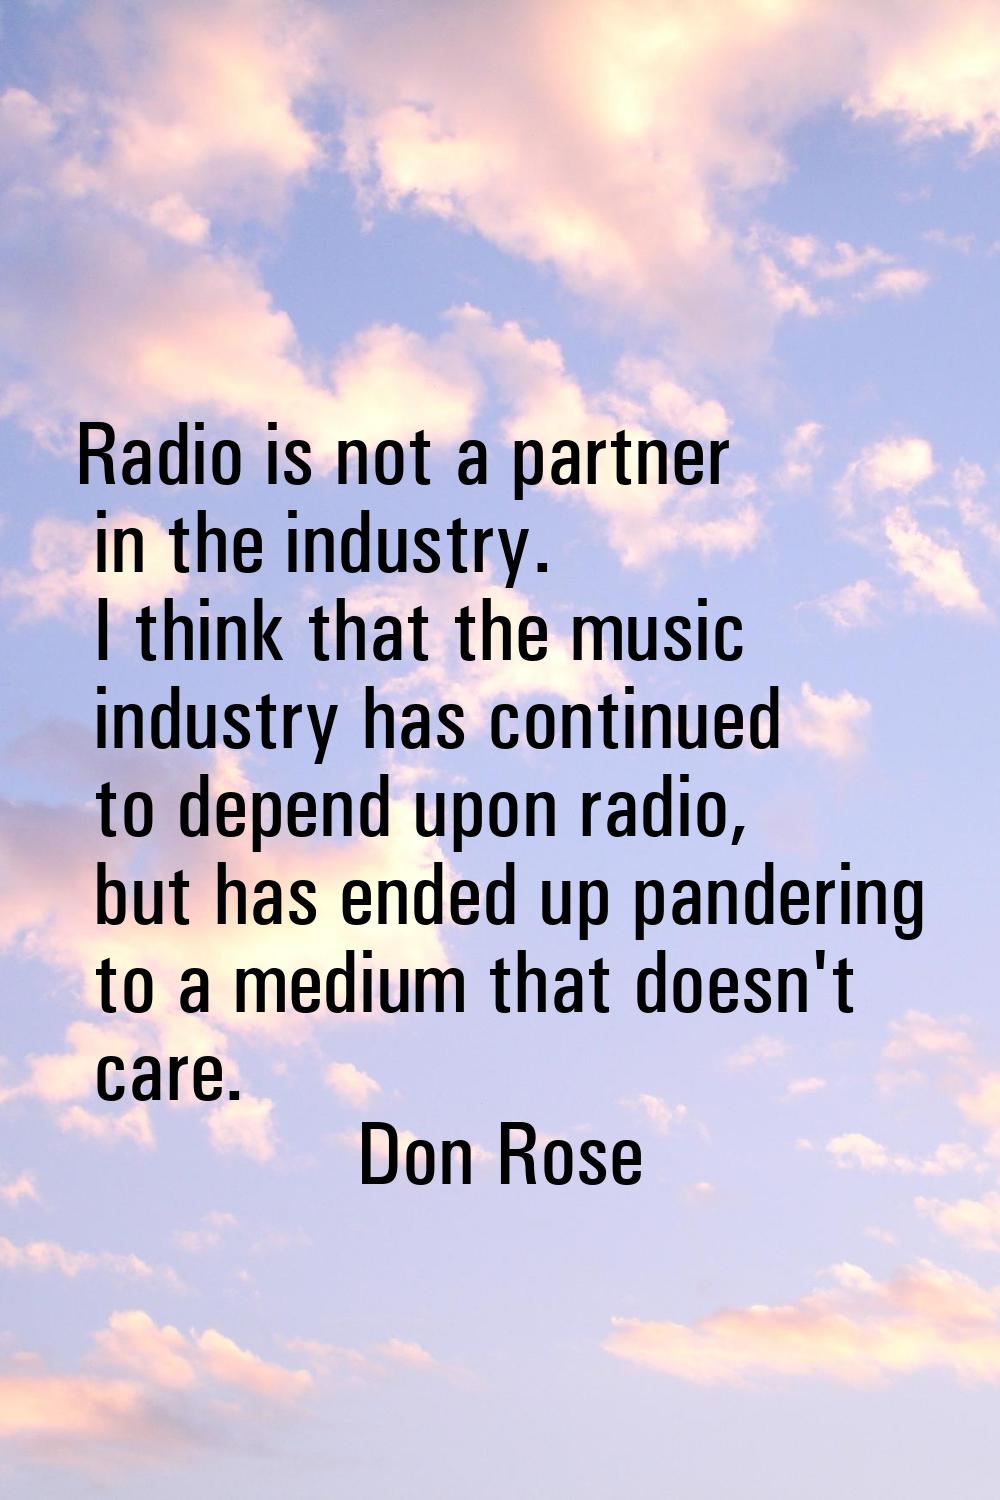 Radio is not a partner in the industry. I think that the music industry has continued to depend upo